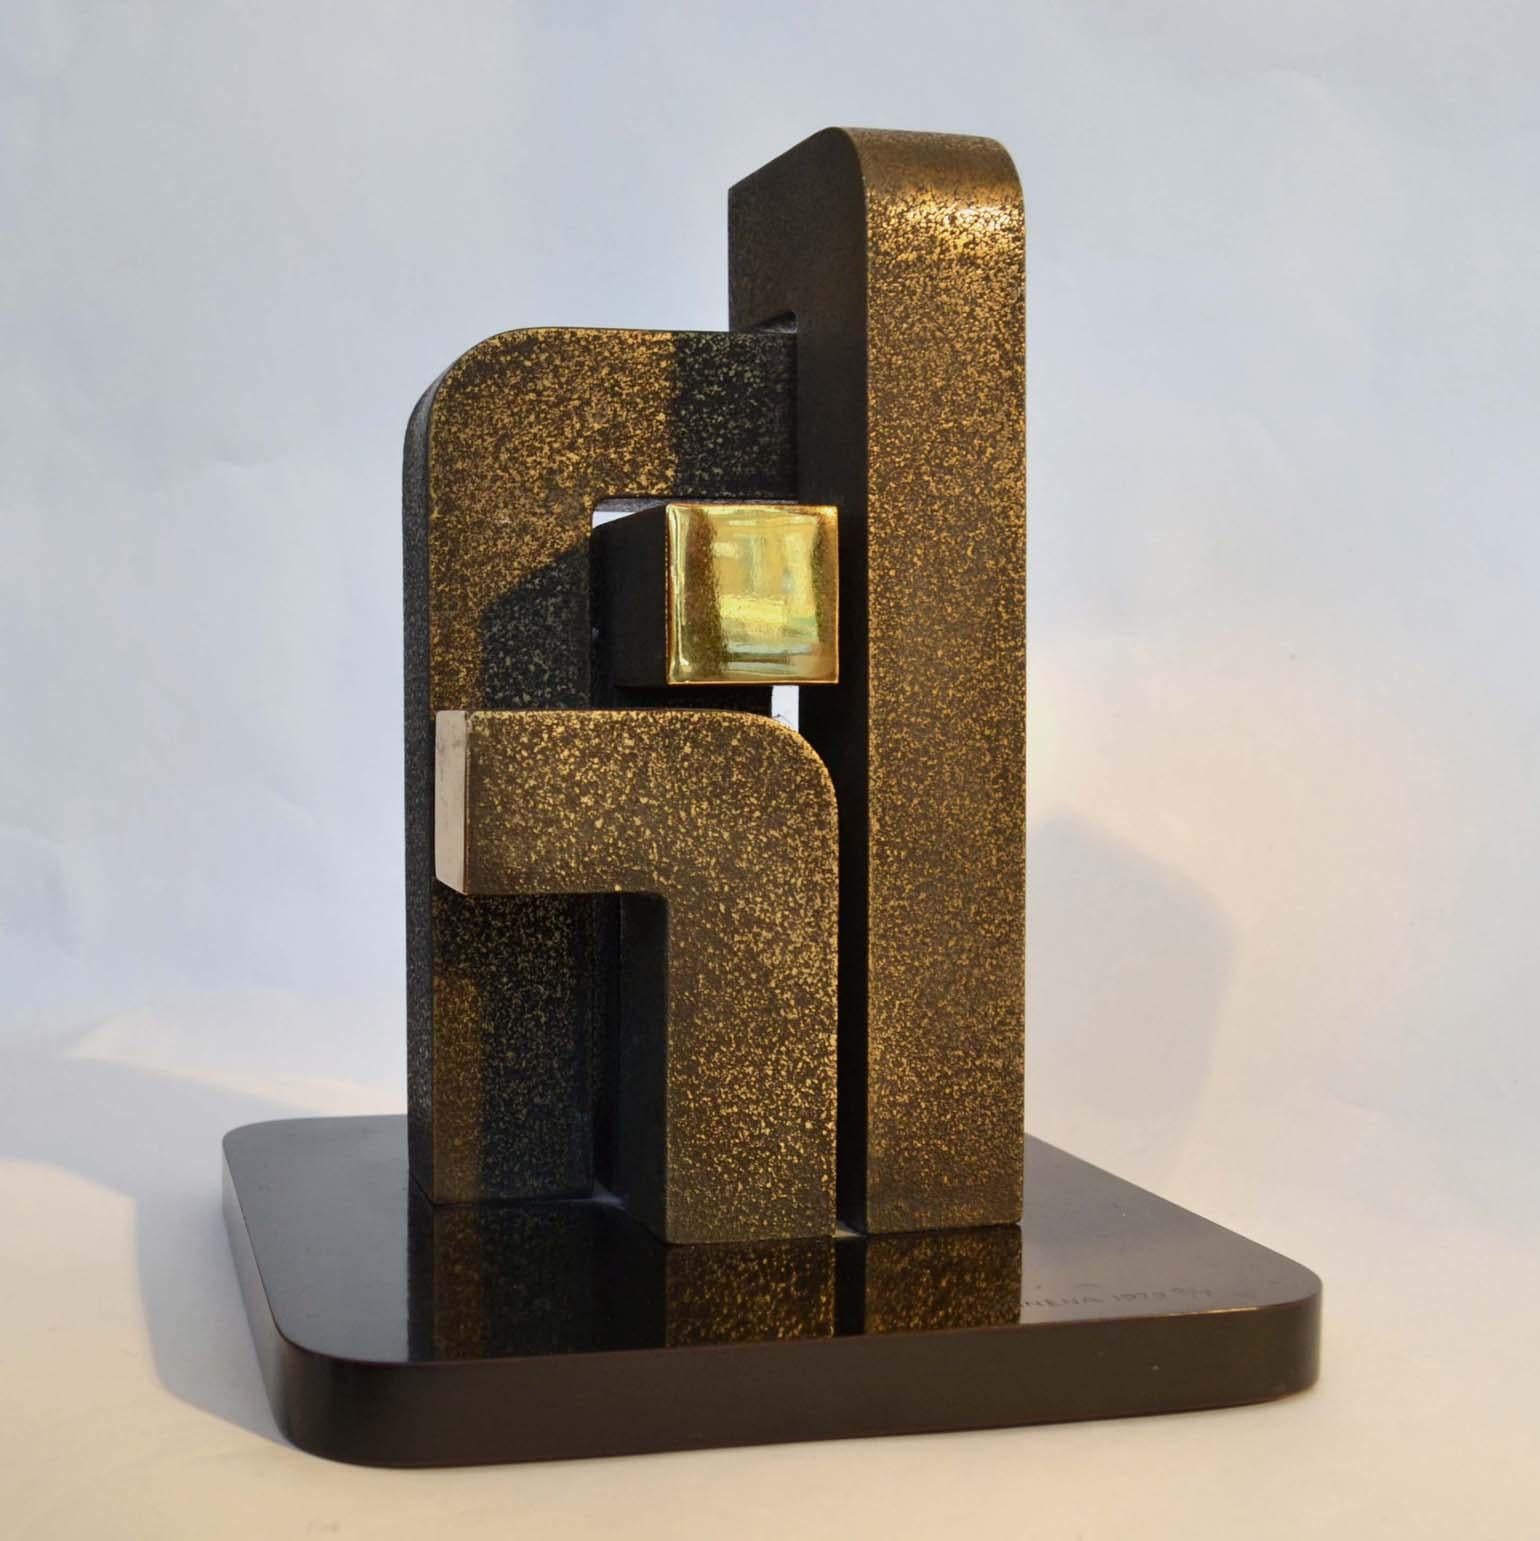 Minimalist abstract geometric sculpture by Zonena, 1979, is an edition of 2/7 bronzes. The balanced composition of 4 leaning columns like modules of form with repeating finishes that emphasized the contrast between the rough texture and highly